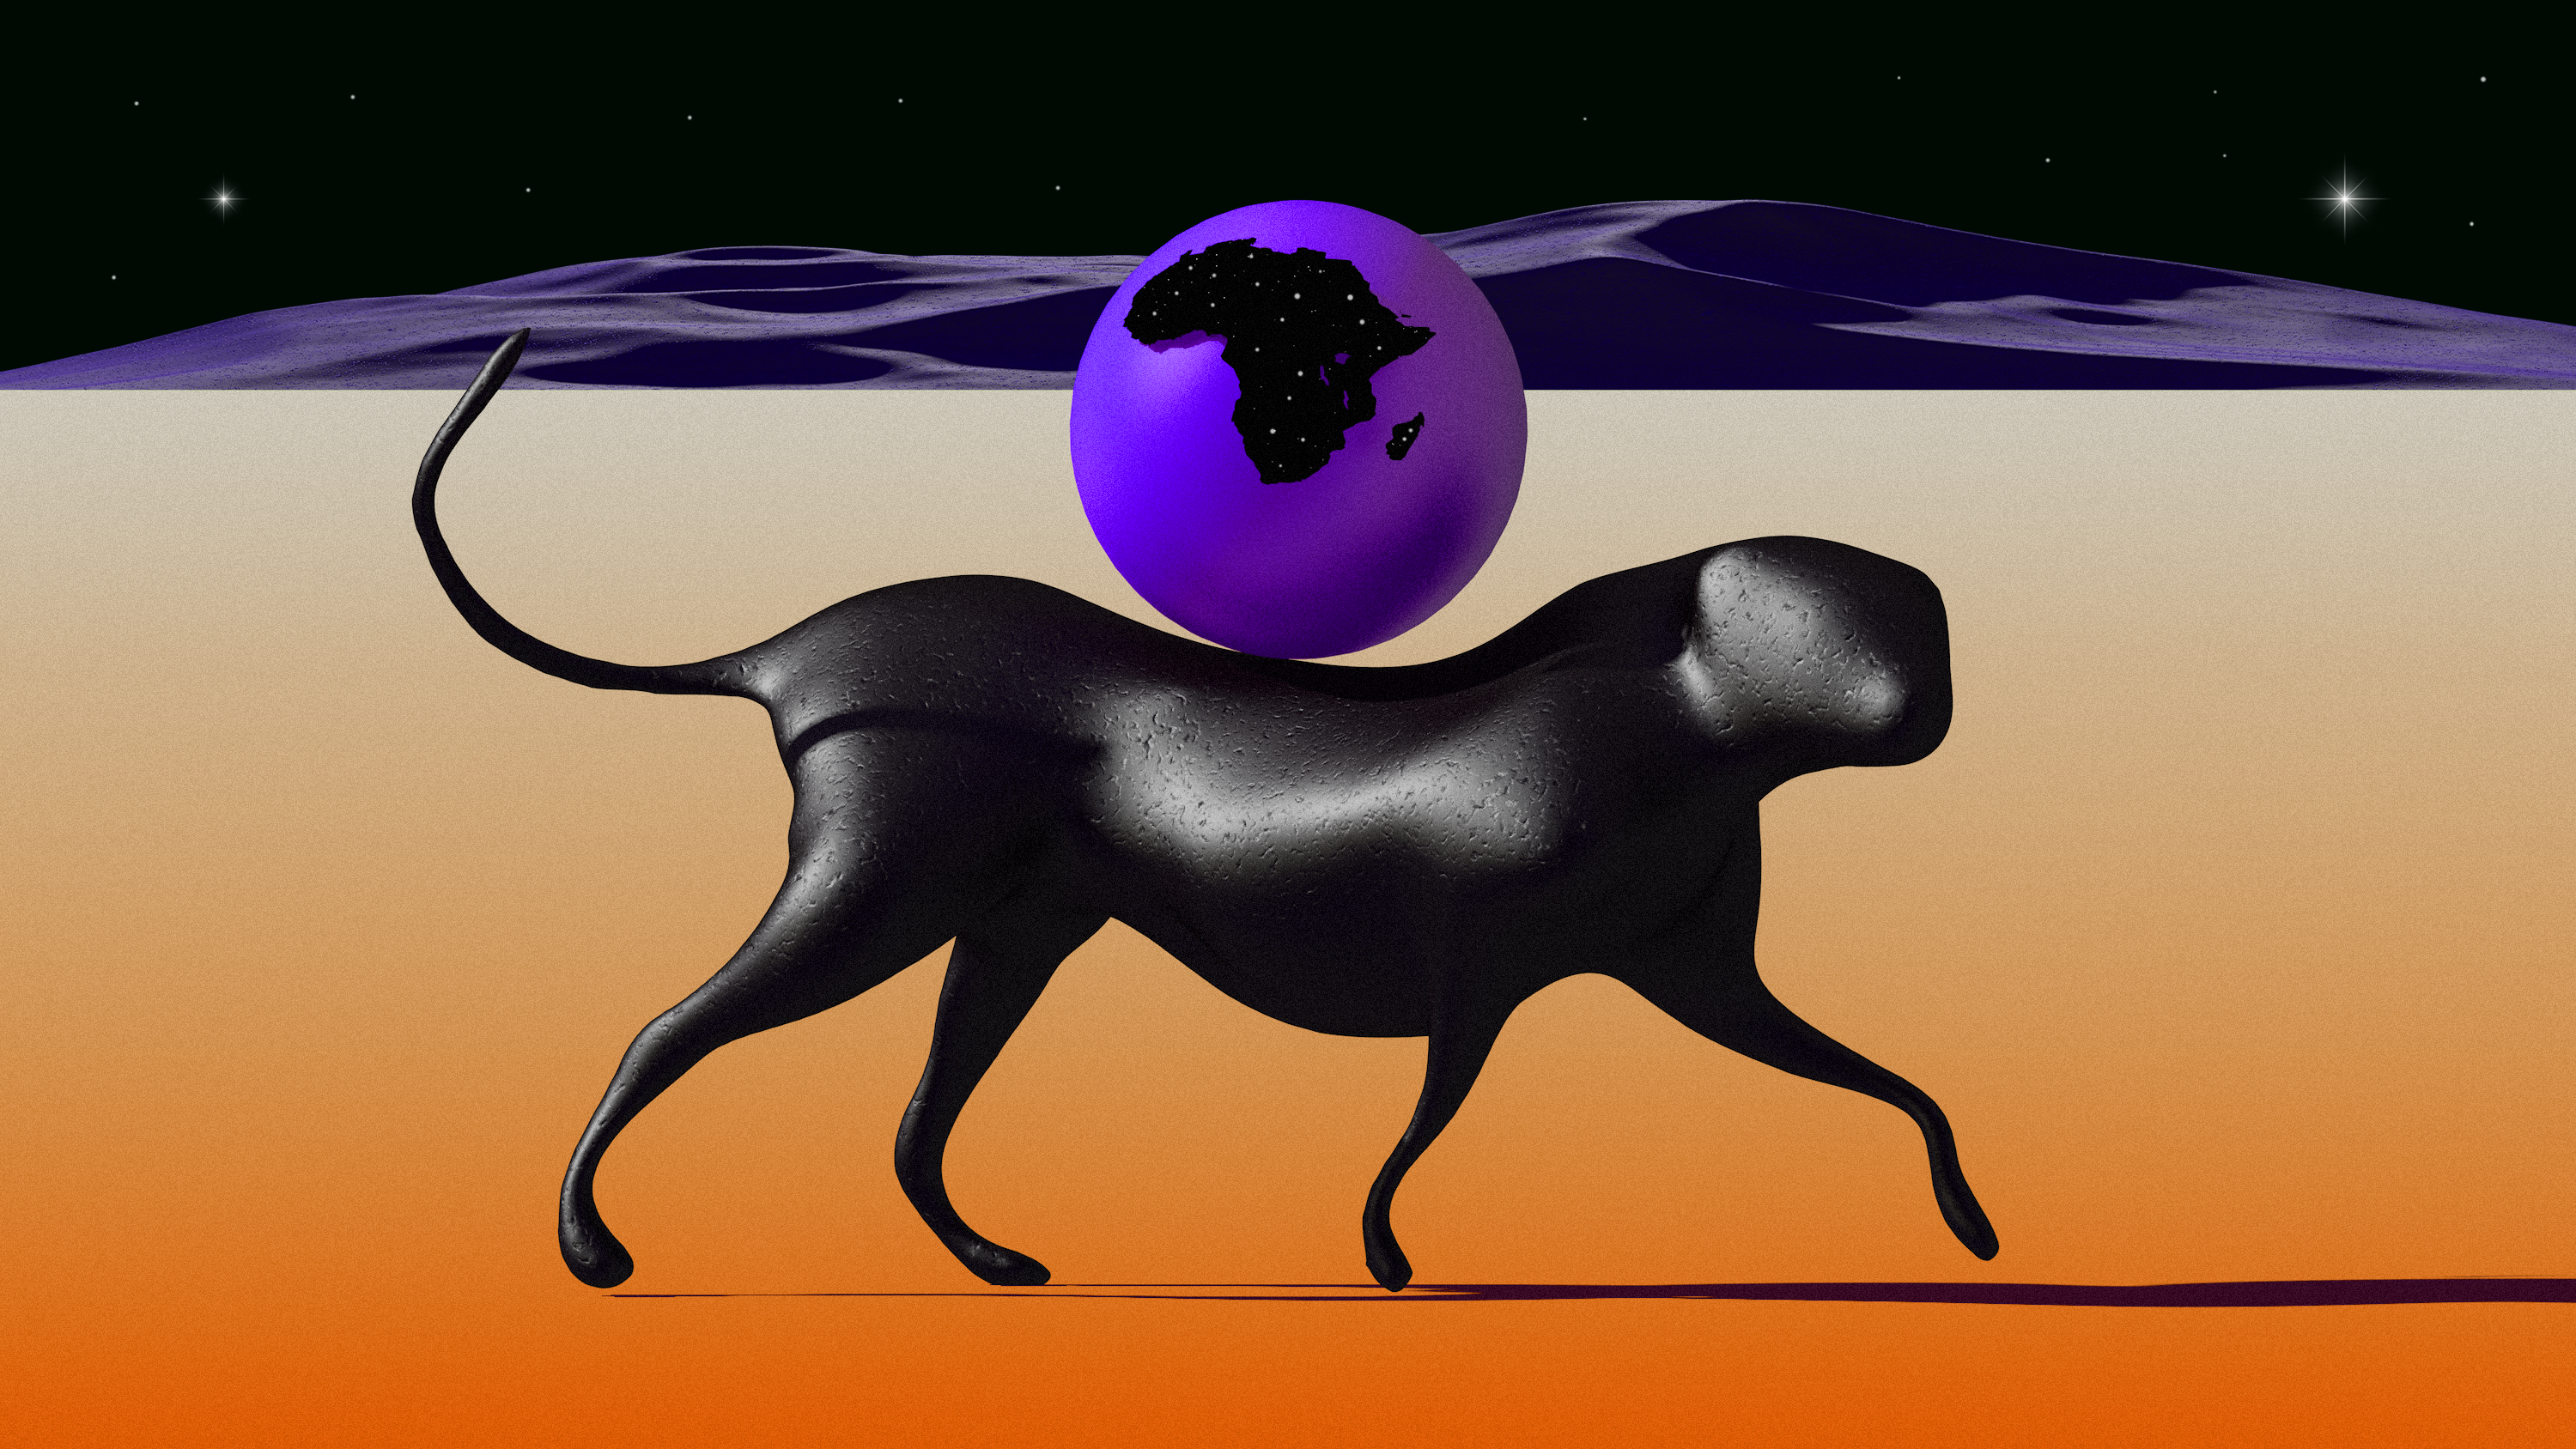 a purple globe showing a black starry African continent riding on the back of a black panther striding across the desert with purple mountains on the horizon